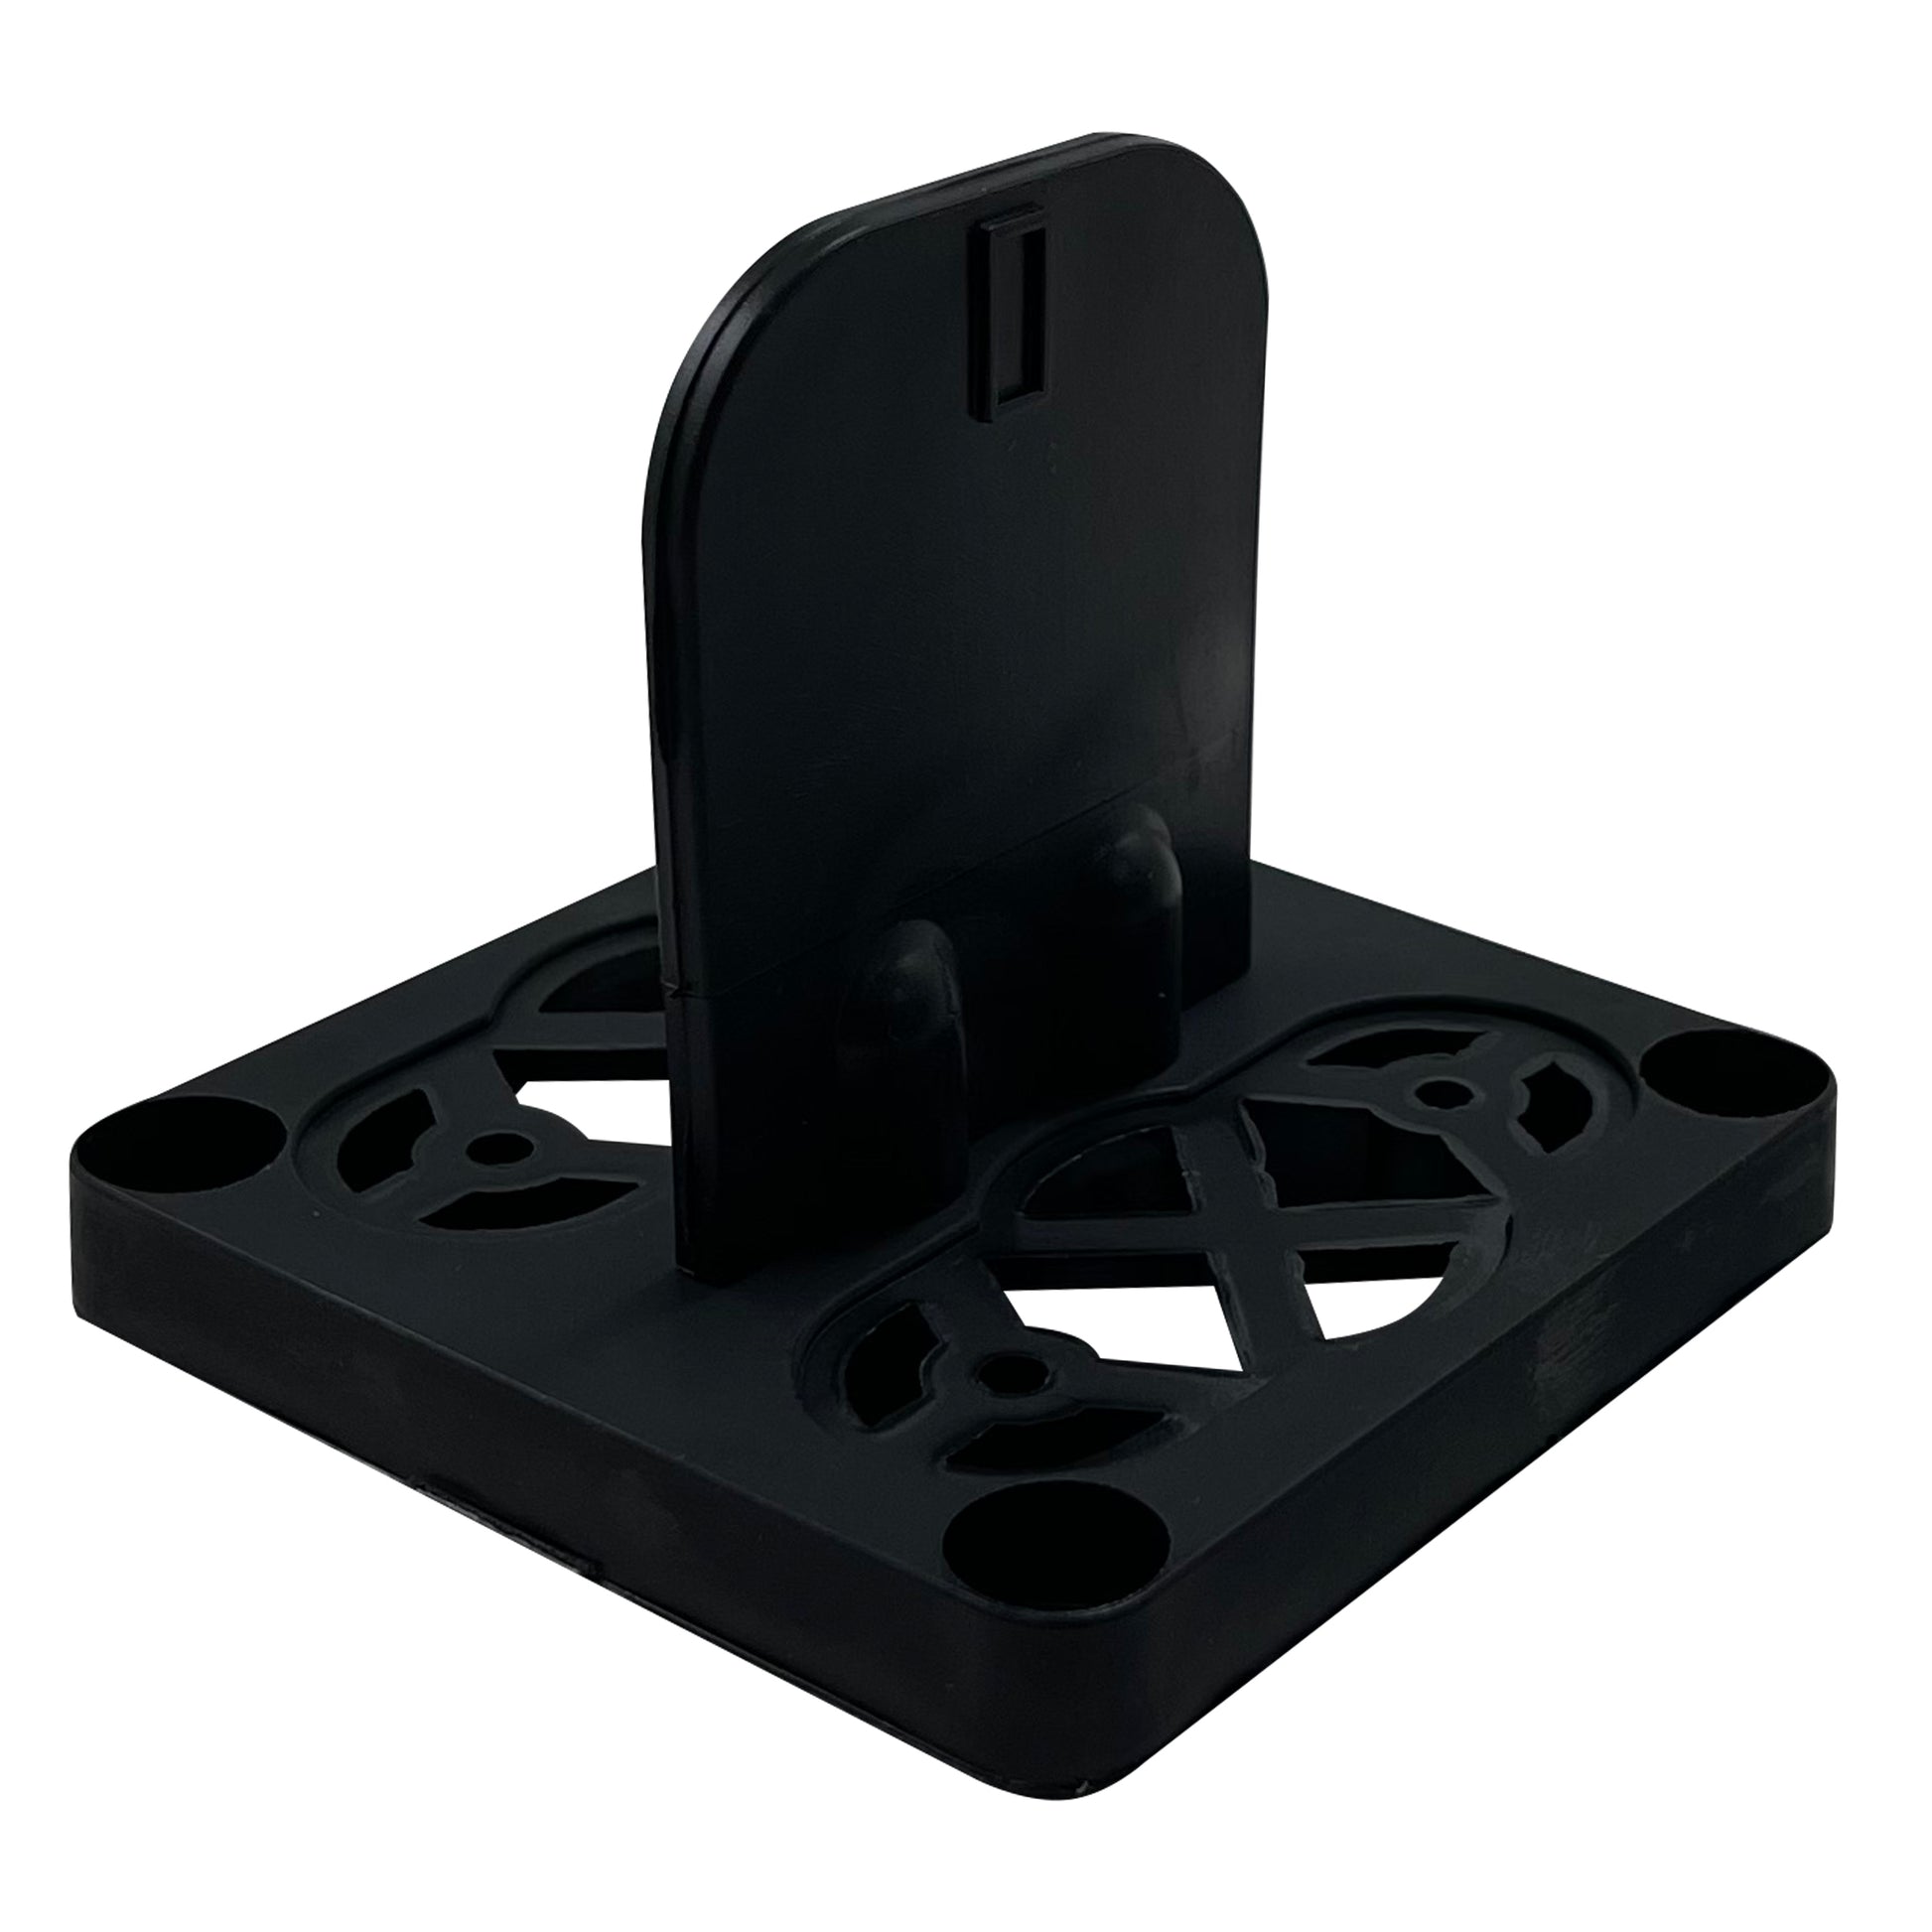 Dual Small Base Single Point Power Post - Black Base Plate Holder